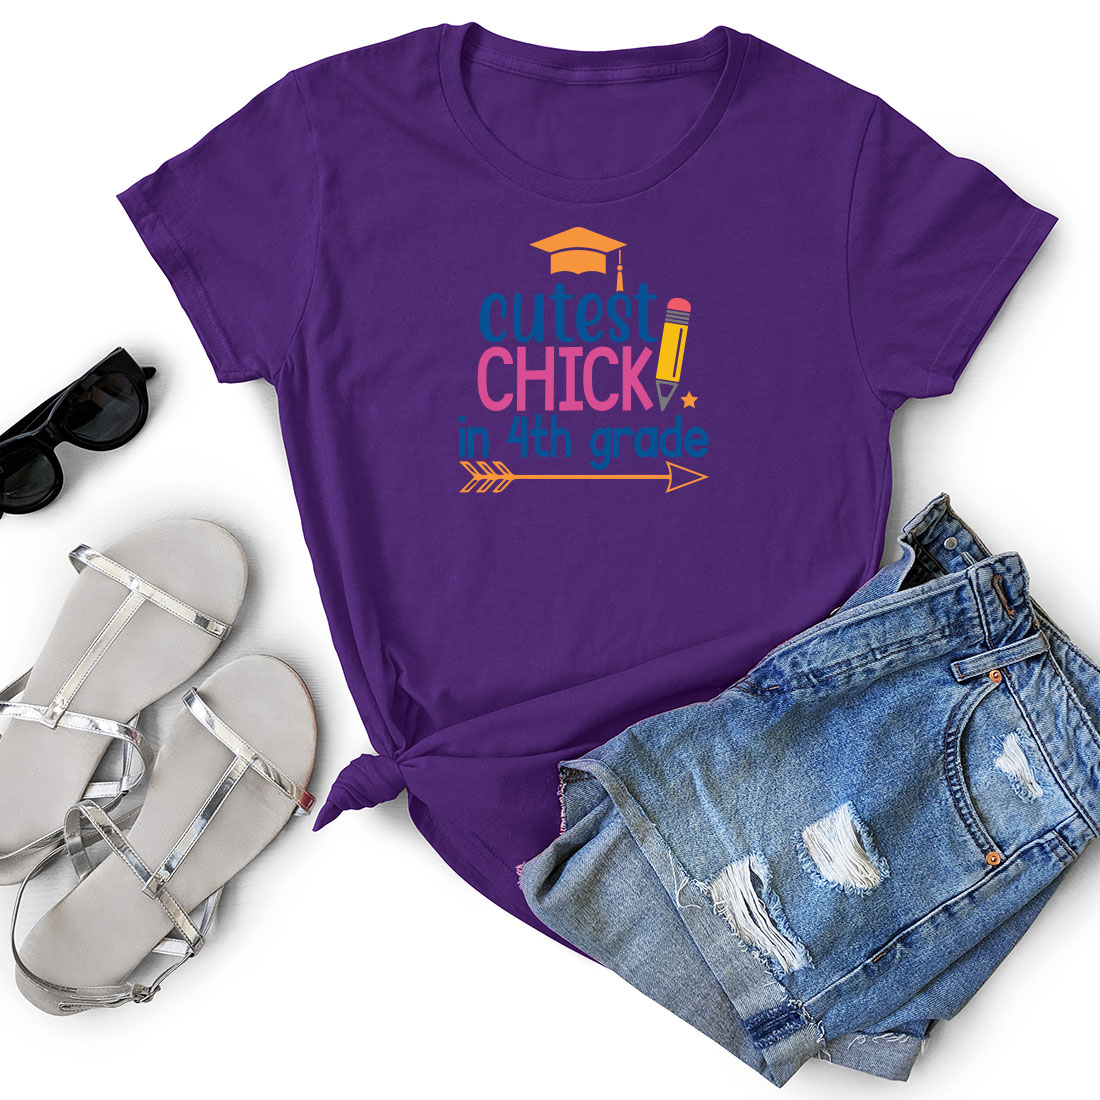 T - shirt that says chick and a pair of shorts.